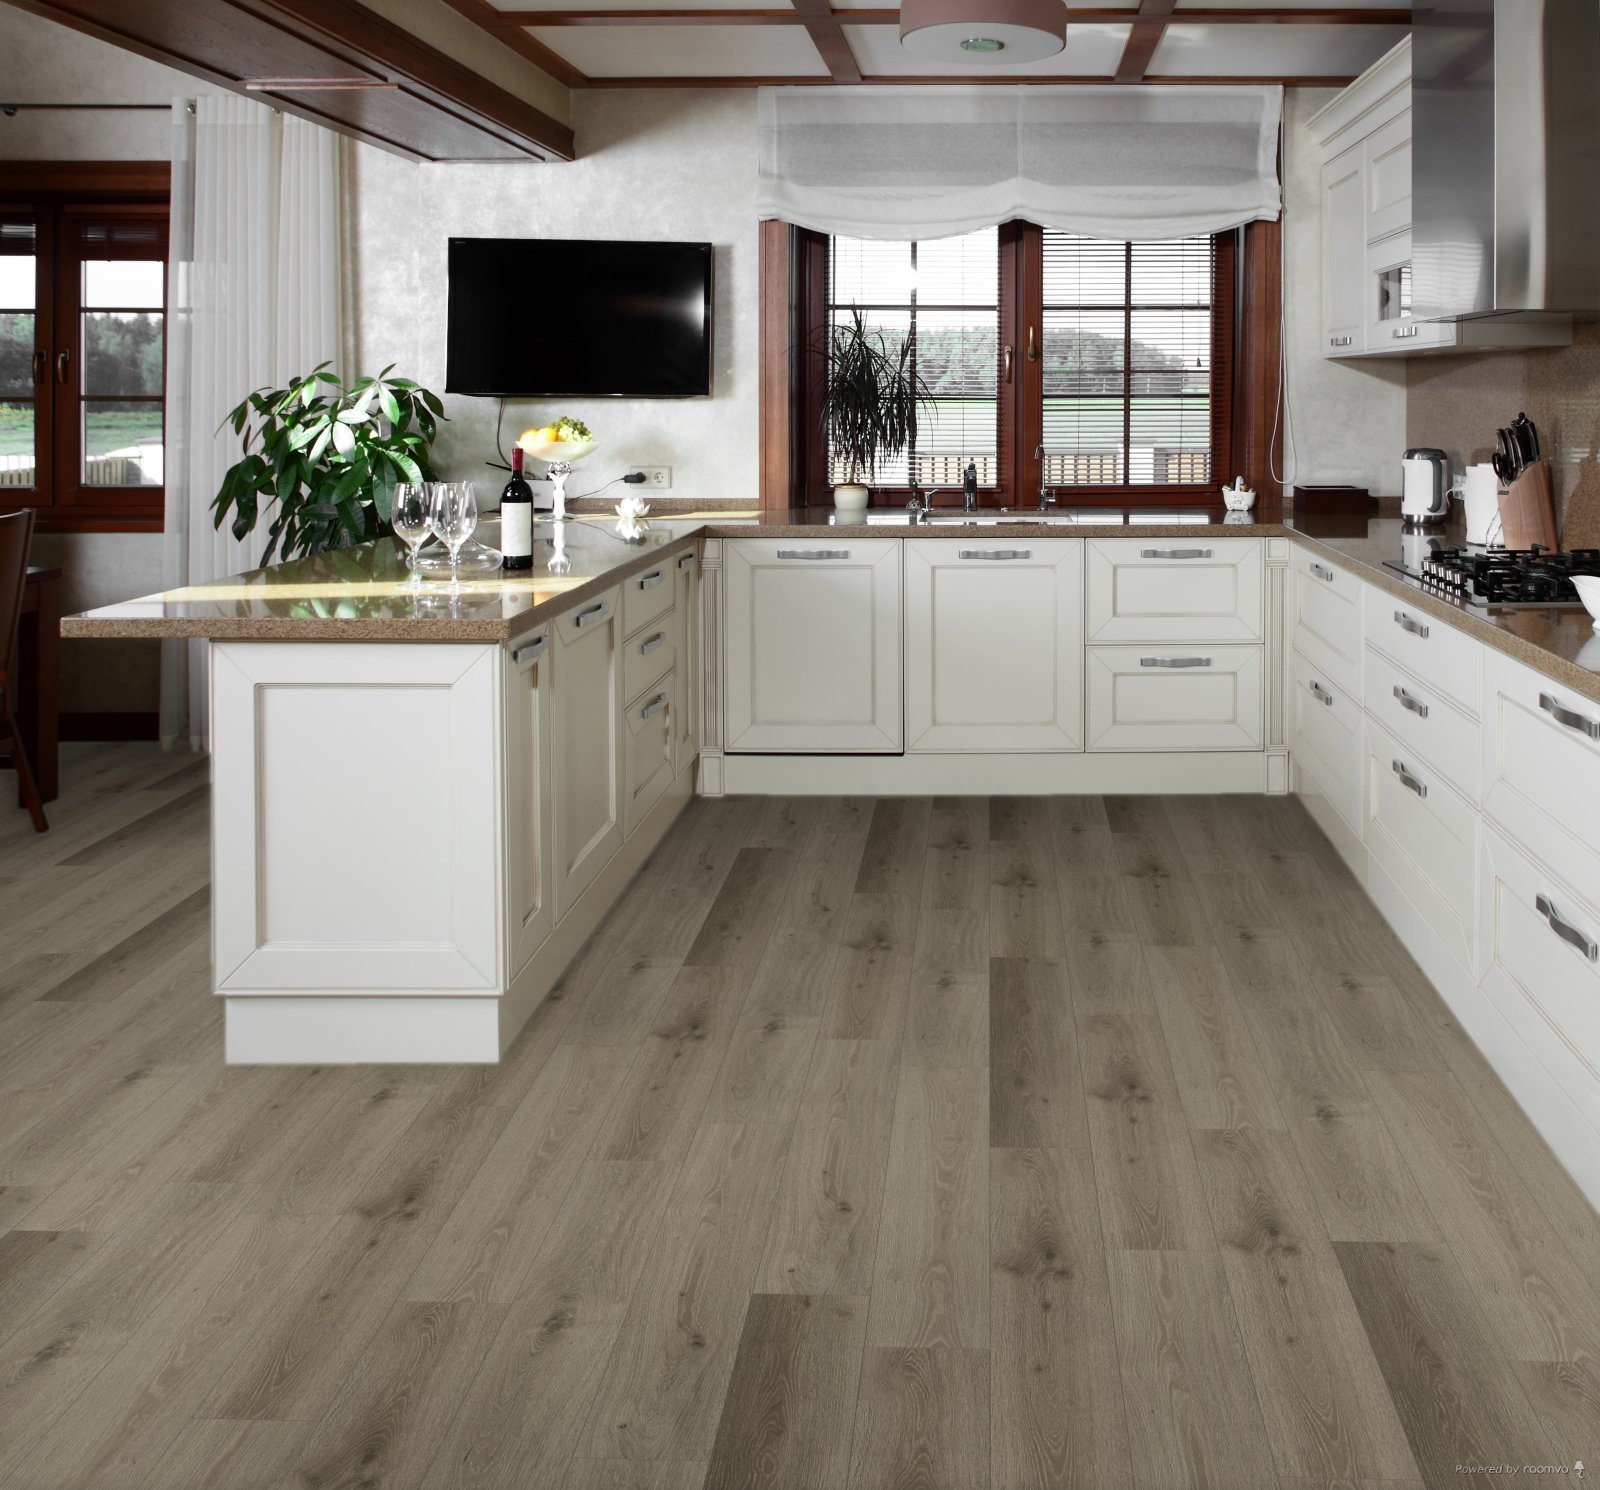 Horizen Flooring presents to you a picture of a quality wide plank London luxury vinyl plank. NovoCore Premium EIR collection features a wide range of colors & designs that will compliment any interior. Natural wood grain synchronized surface allow for an authentic hardwood look & feel. This collection features a 0.25″ / 6.5 mm overall thickness and a durable 22 mil / 0.55 mm wear layer for residential and commercial applications.